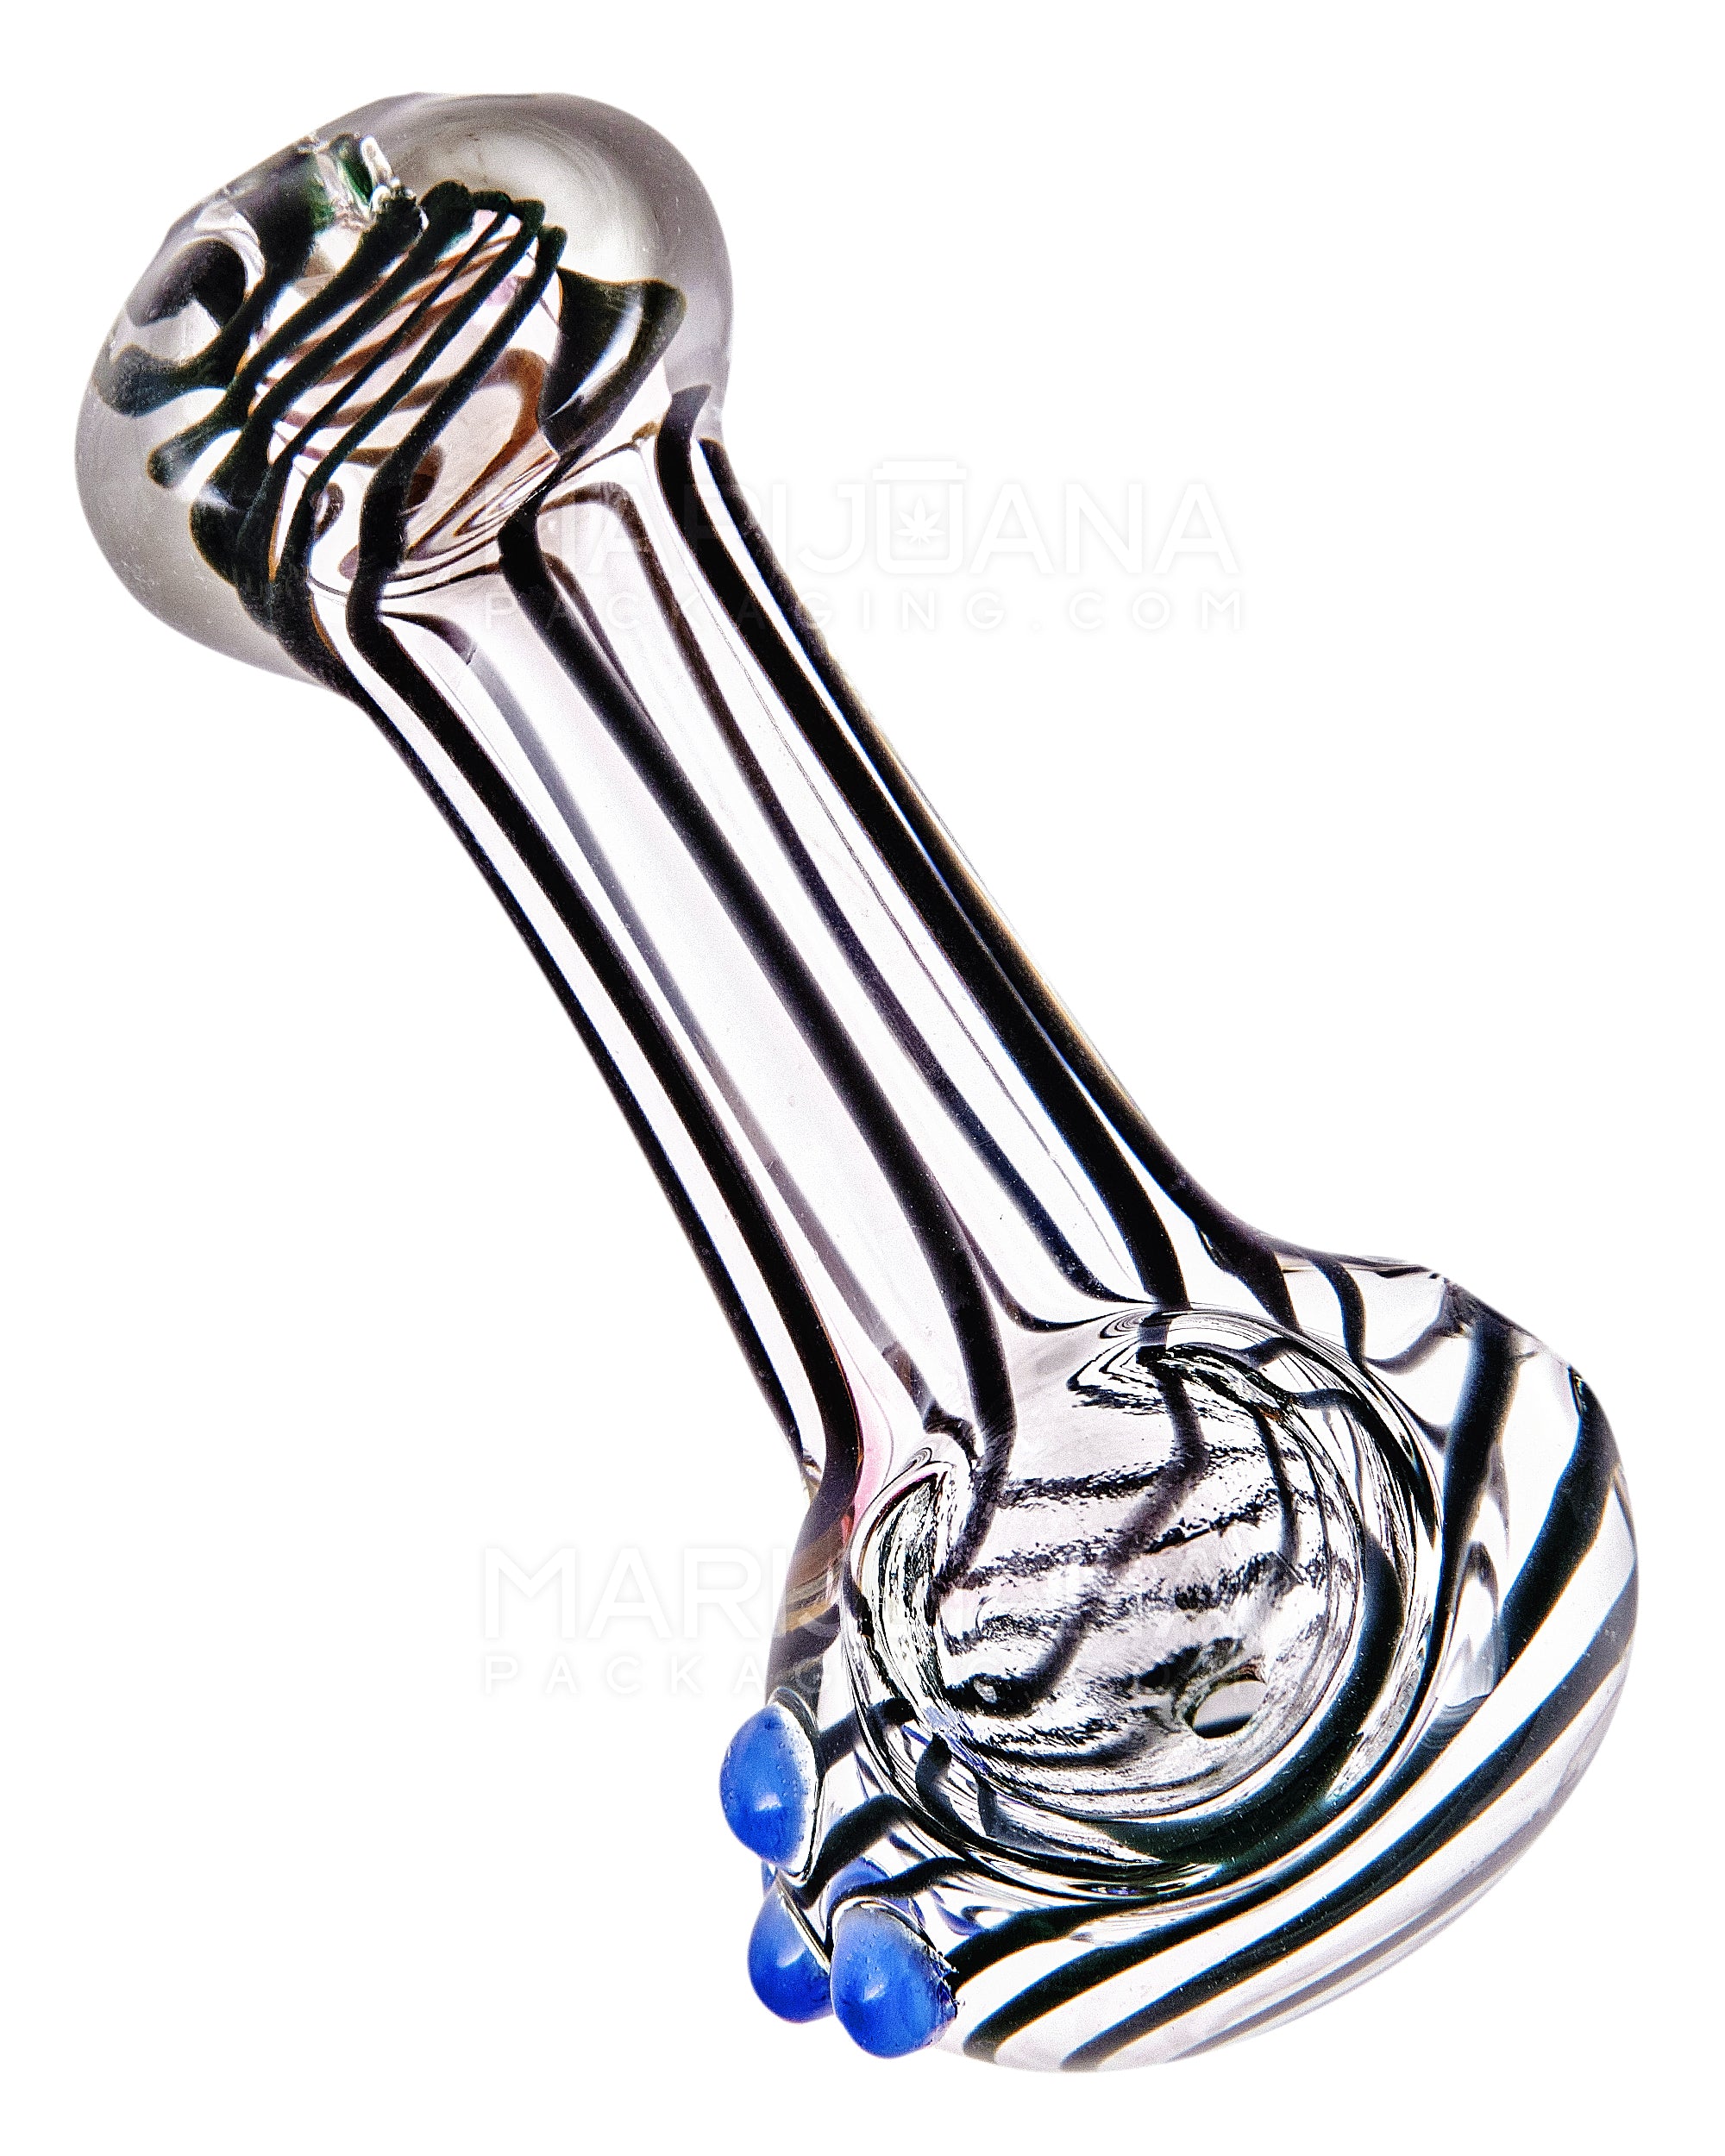 Spiral & Fumed Spoon Hand Pipe w/ Triple Knockers | 3.5in Long - Glass - Assorted - 1